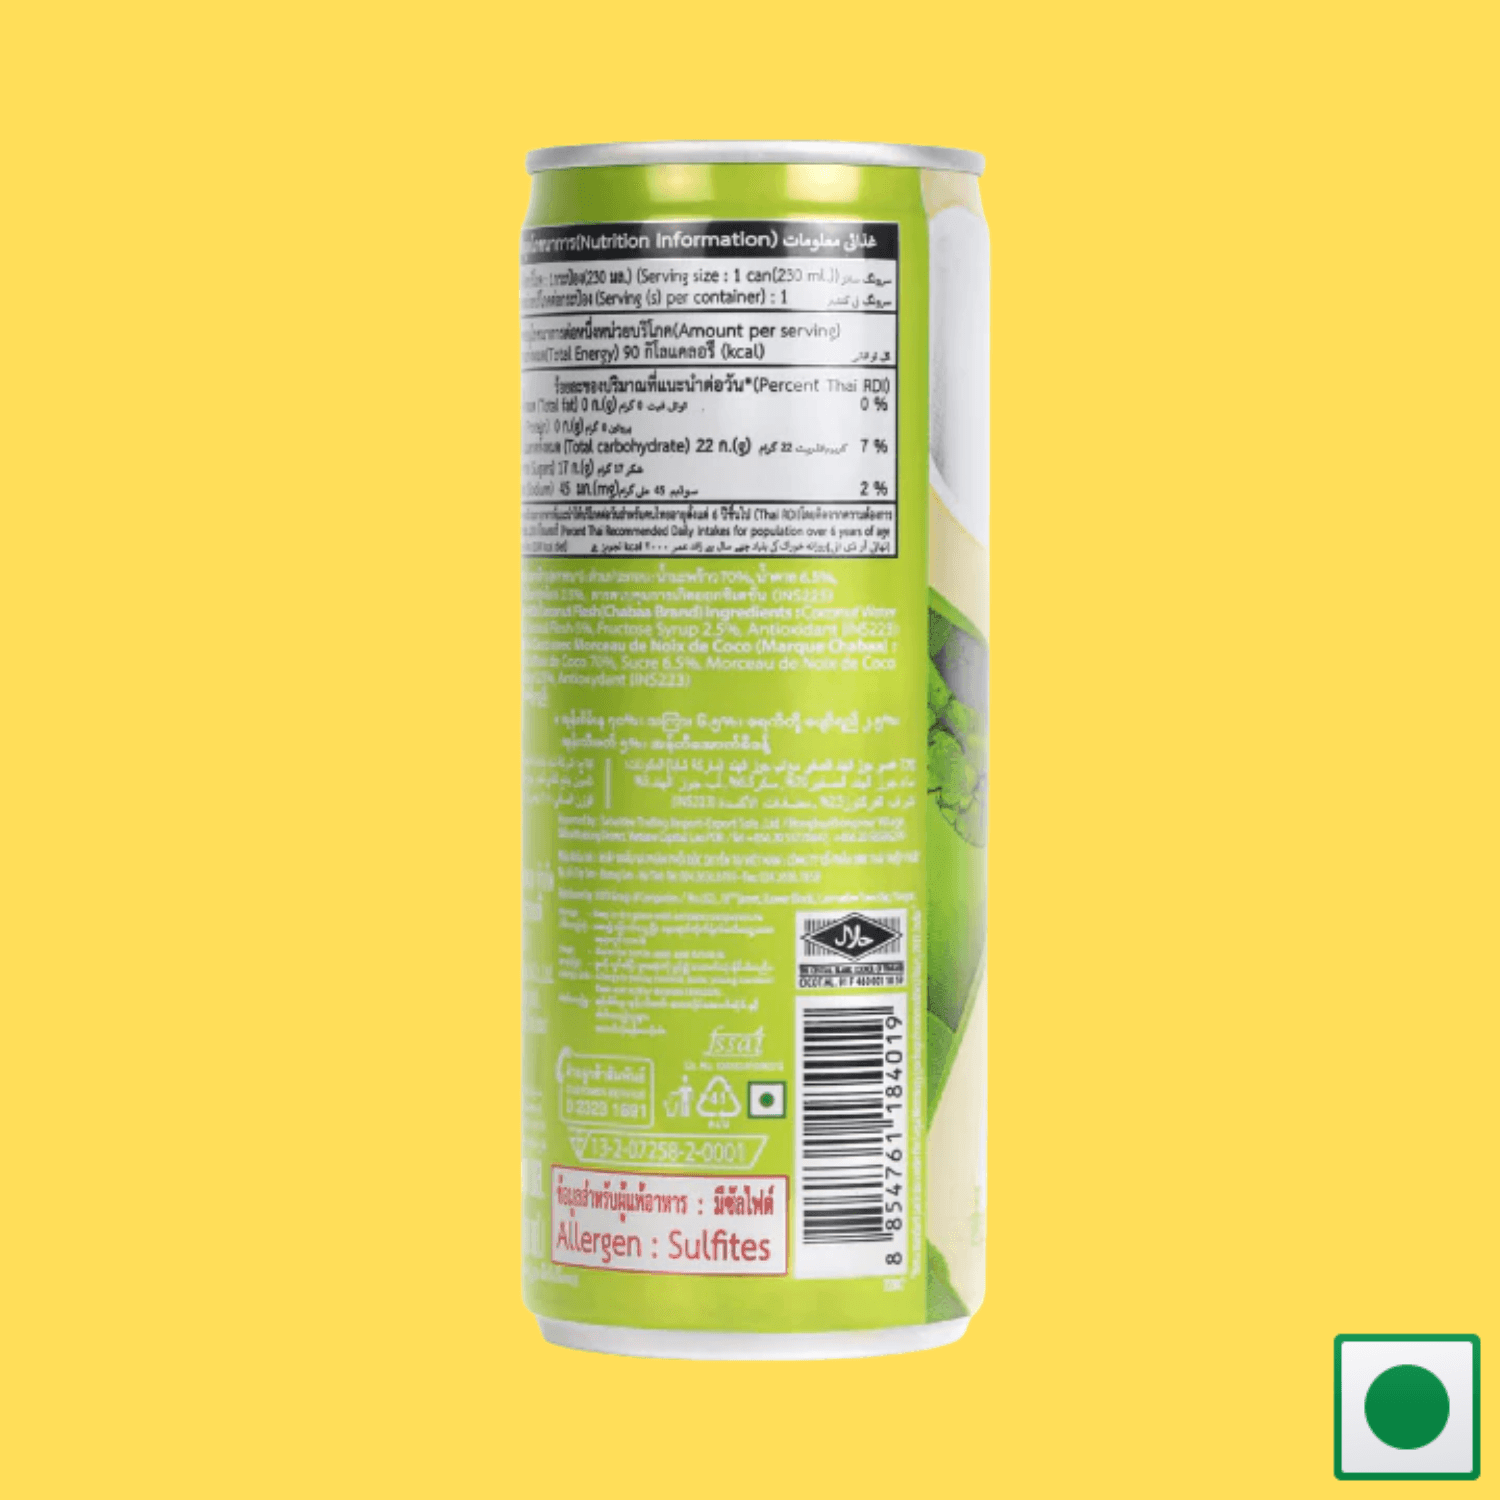 Chabaa Coconut Water Can, 230ml (Imported) - Super 7 Mart